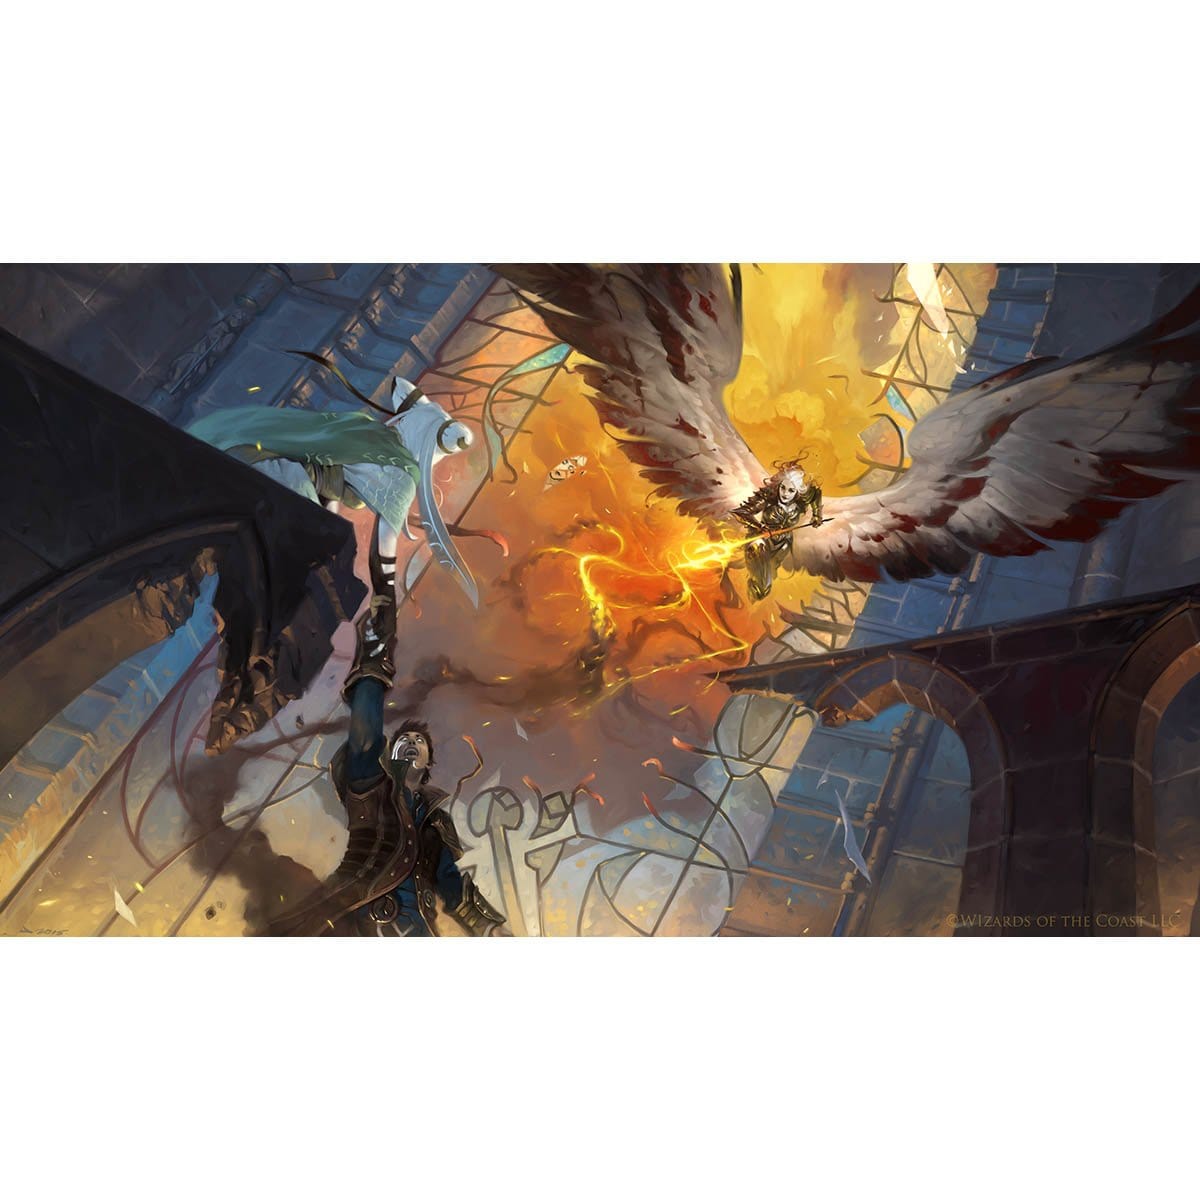 Avacyn's Judgement Print - Print - Original Magic Art - Accessories for Magic the Gathering and other card games